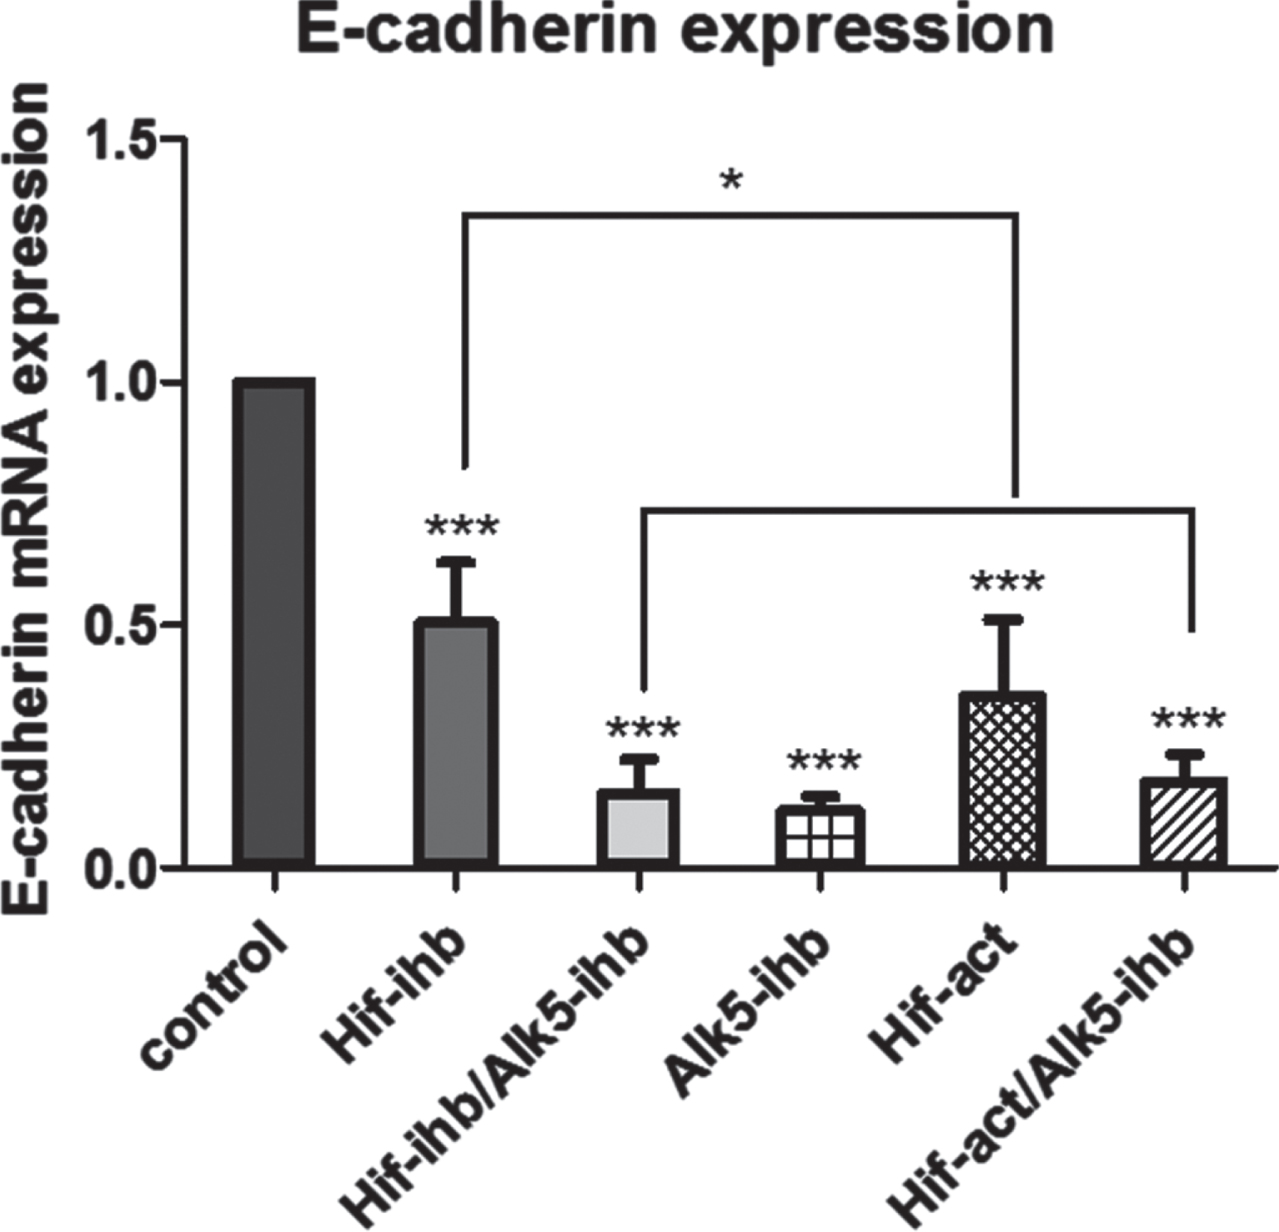 The effect of HIF-1α and ALK5 signaling pathways on E-cadherin expression in a mouse melanoma model. E-cadherin expression was significantly reduced in all treated groups compared with the control group (***p < 0.001). E-cadherin expression in the HIF-ihb group was higher than in the HIF-act group (*p < 0.05). Each bar represents mean±SEM. Alk5-ihb: ALK5 inhibitor, HIF-ihb: HIF-1α inhibitor, HIF-act: HIF-1α activator.